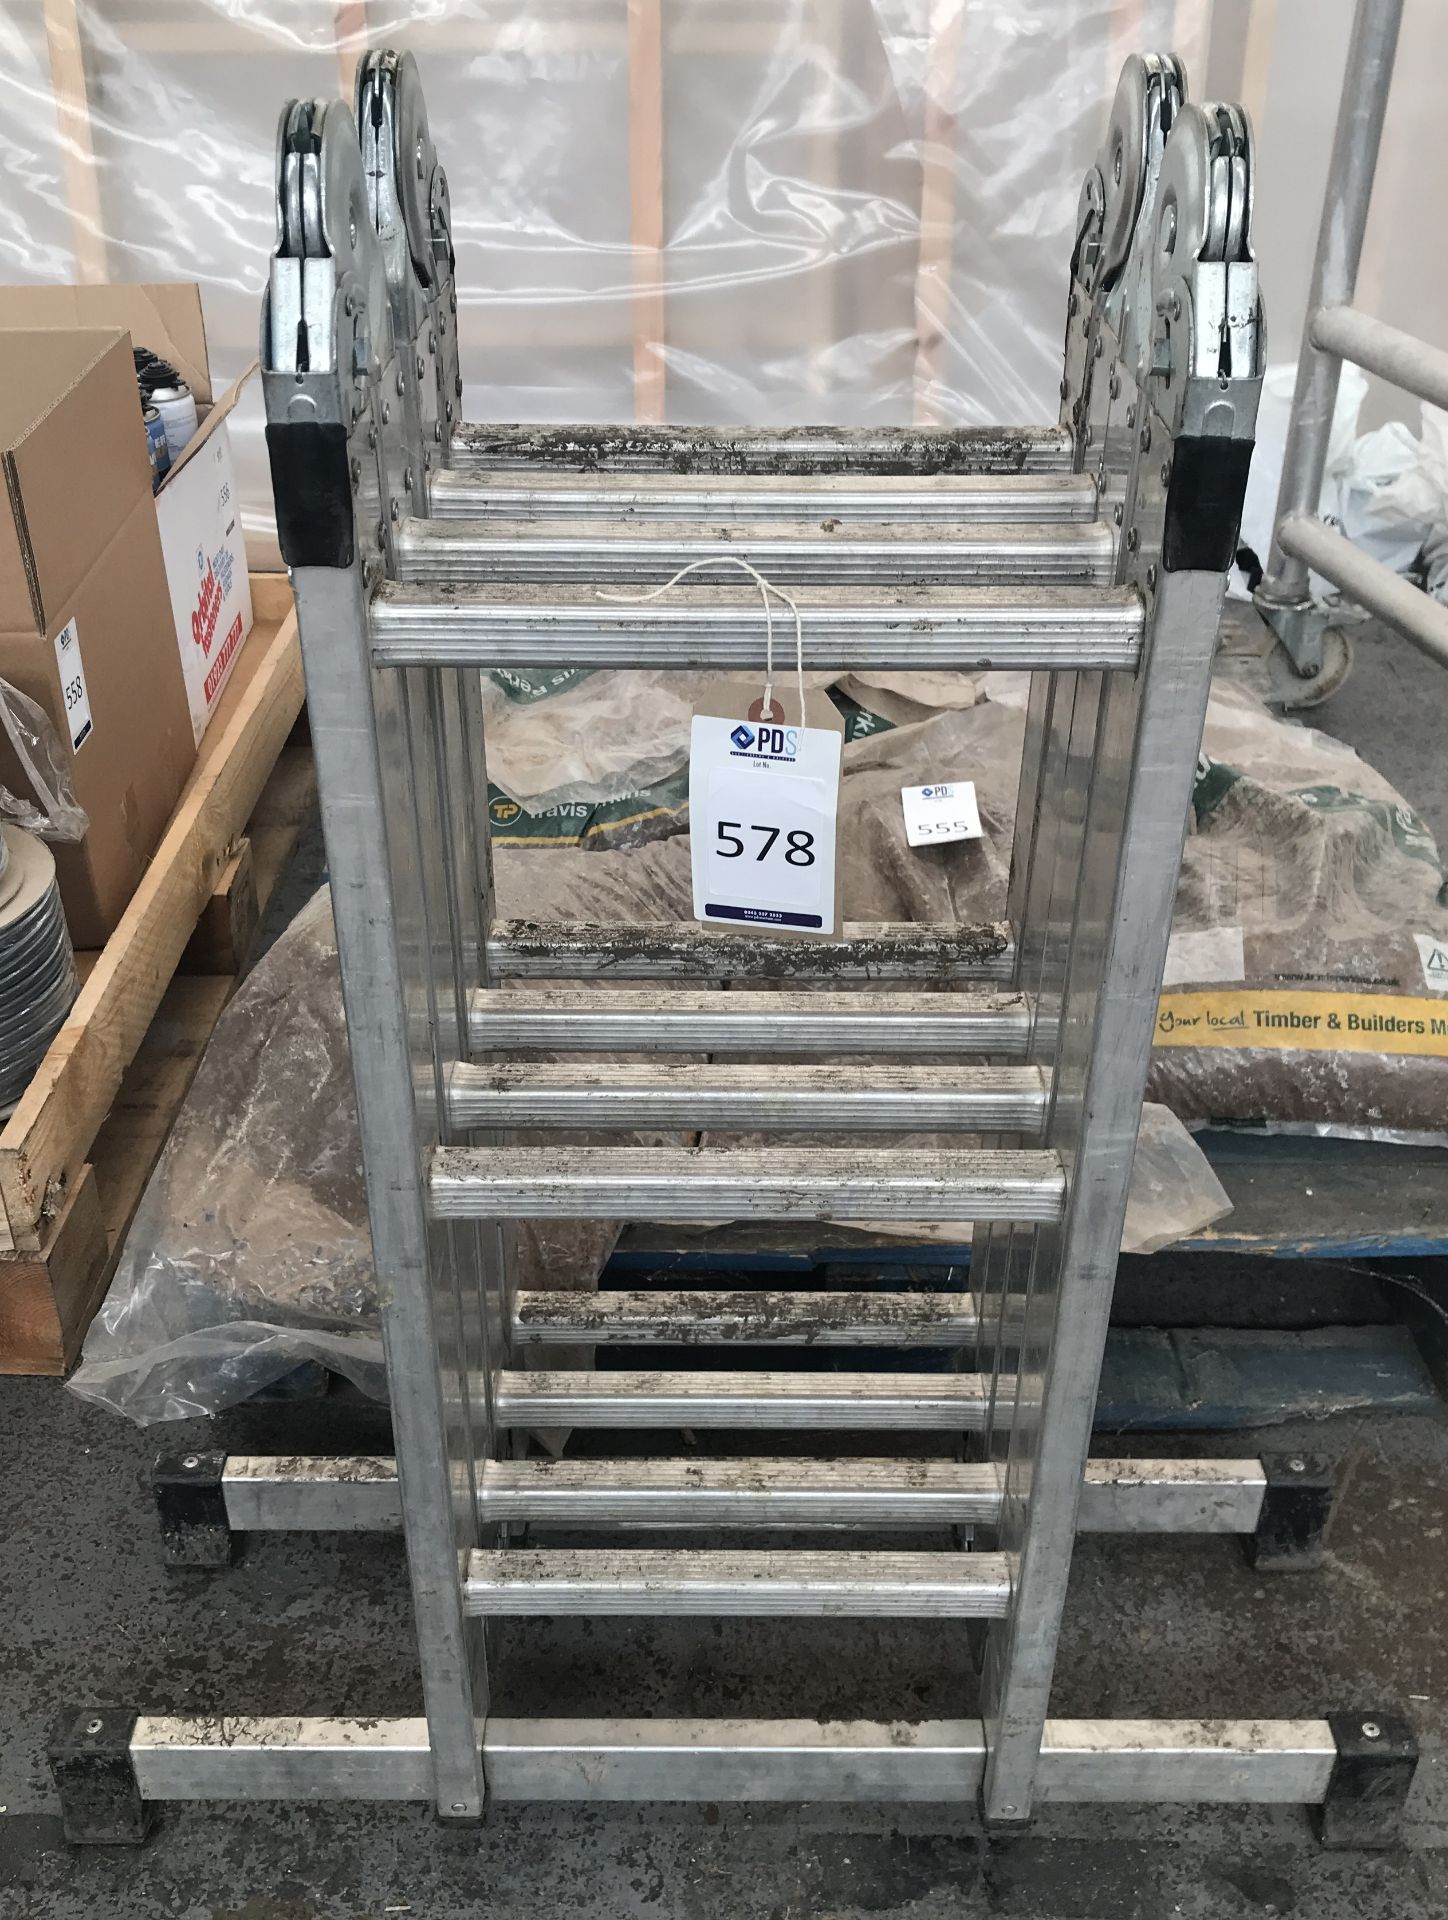 Youngman Multi-Purpose Folding Ladder 4x3 (Located: Barton-le-Clay. Please Refer to General Notes)